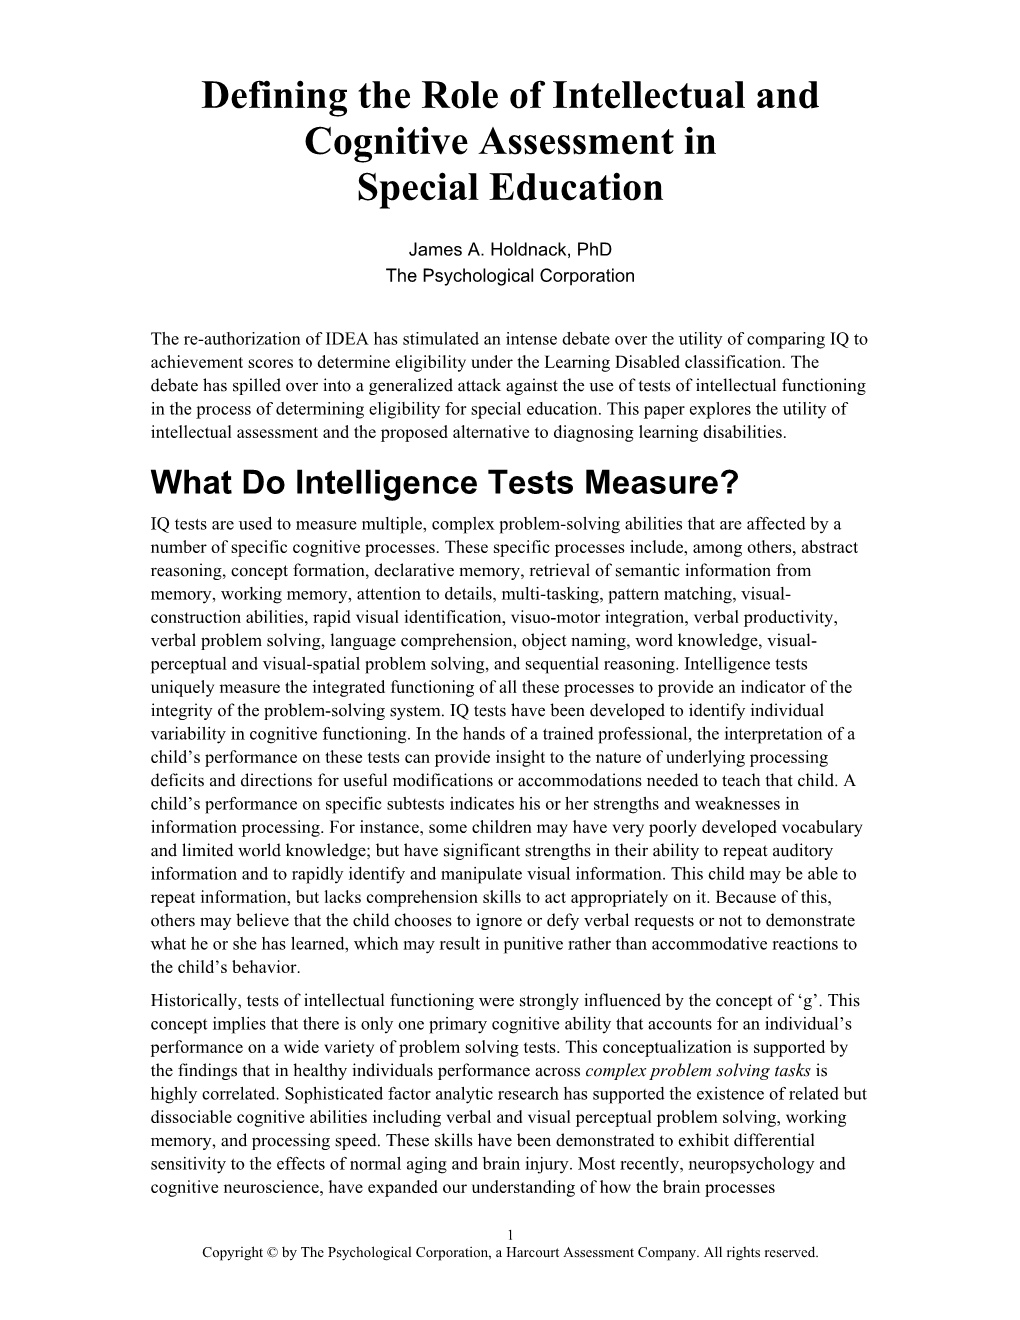 Defining the Role of Intellectual and Cognitive Assessment in Special Education